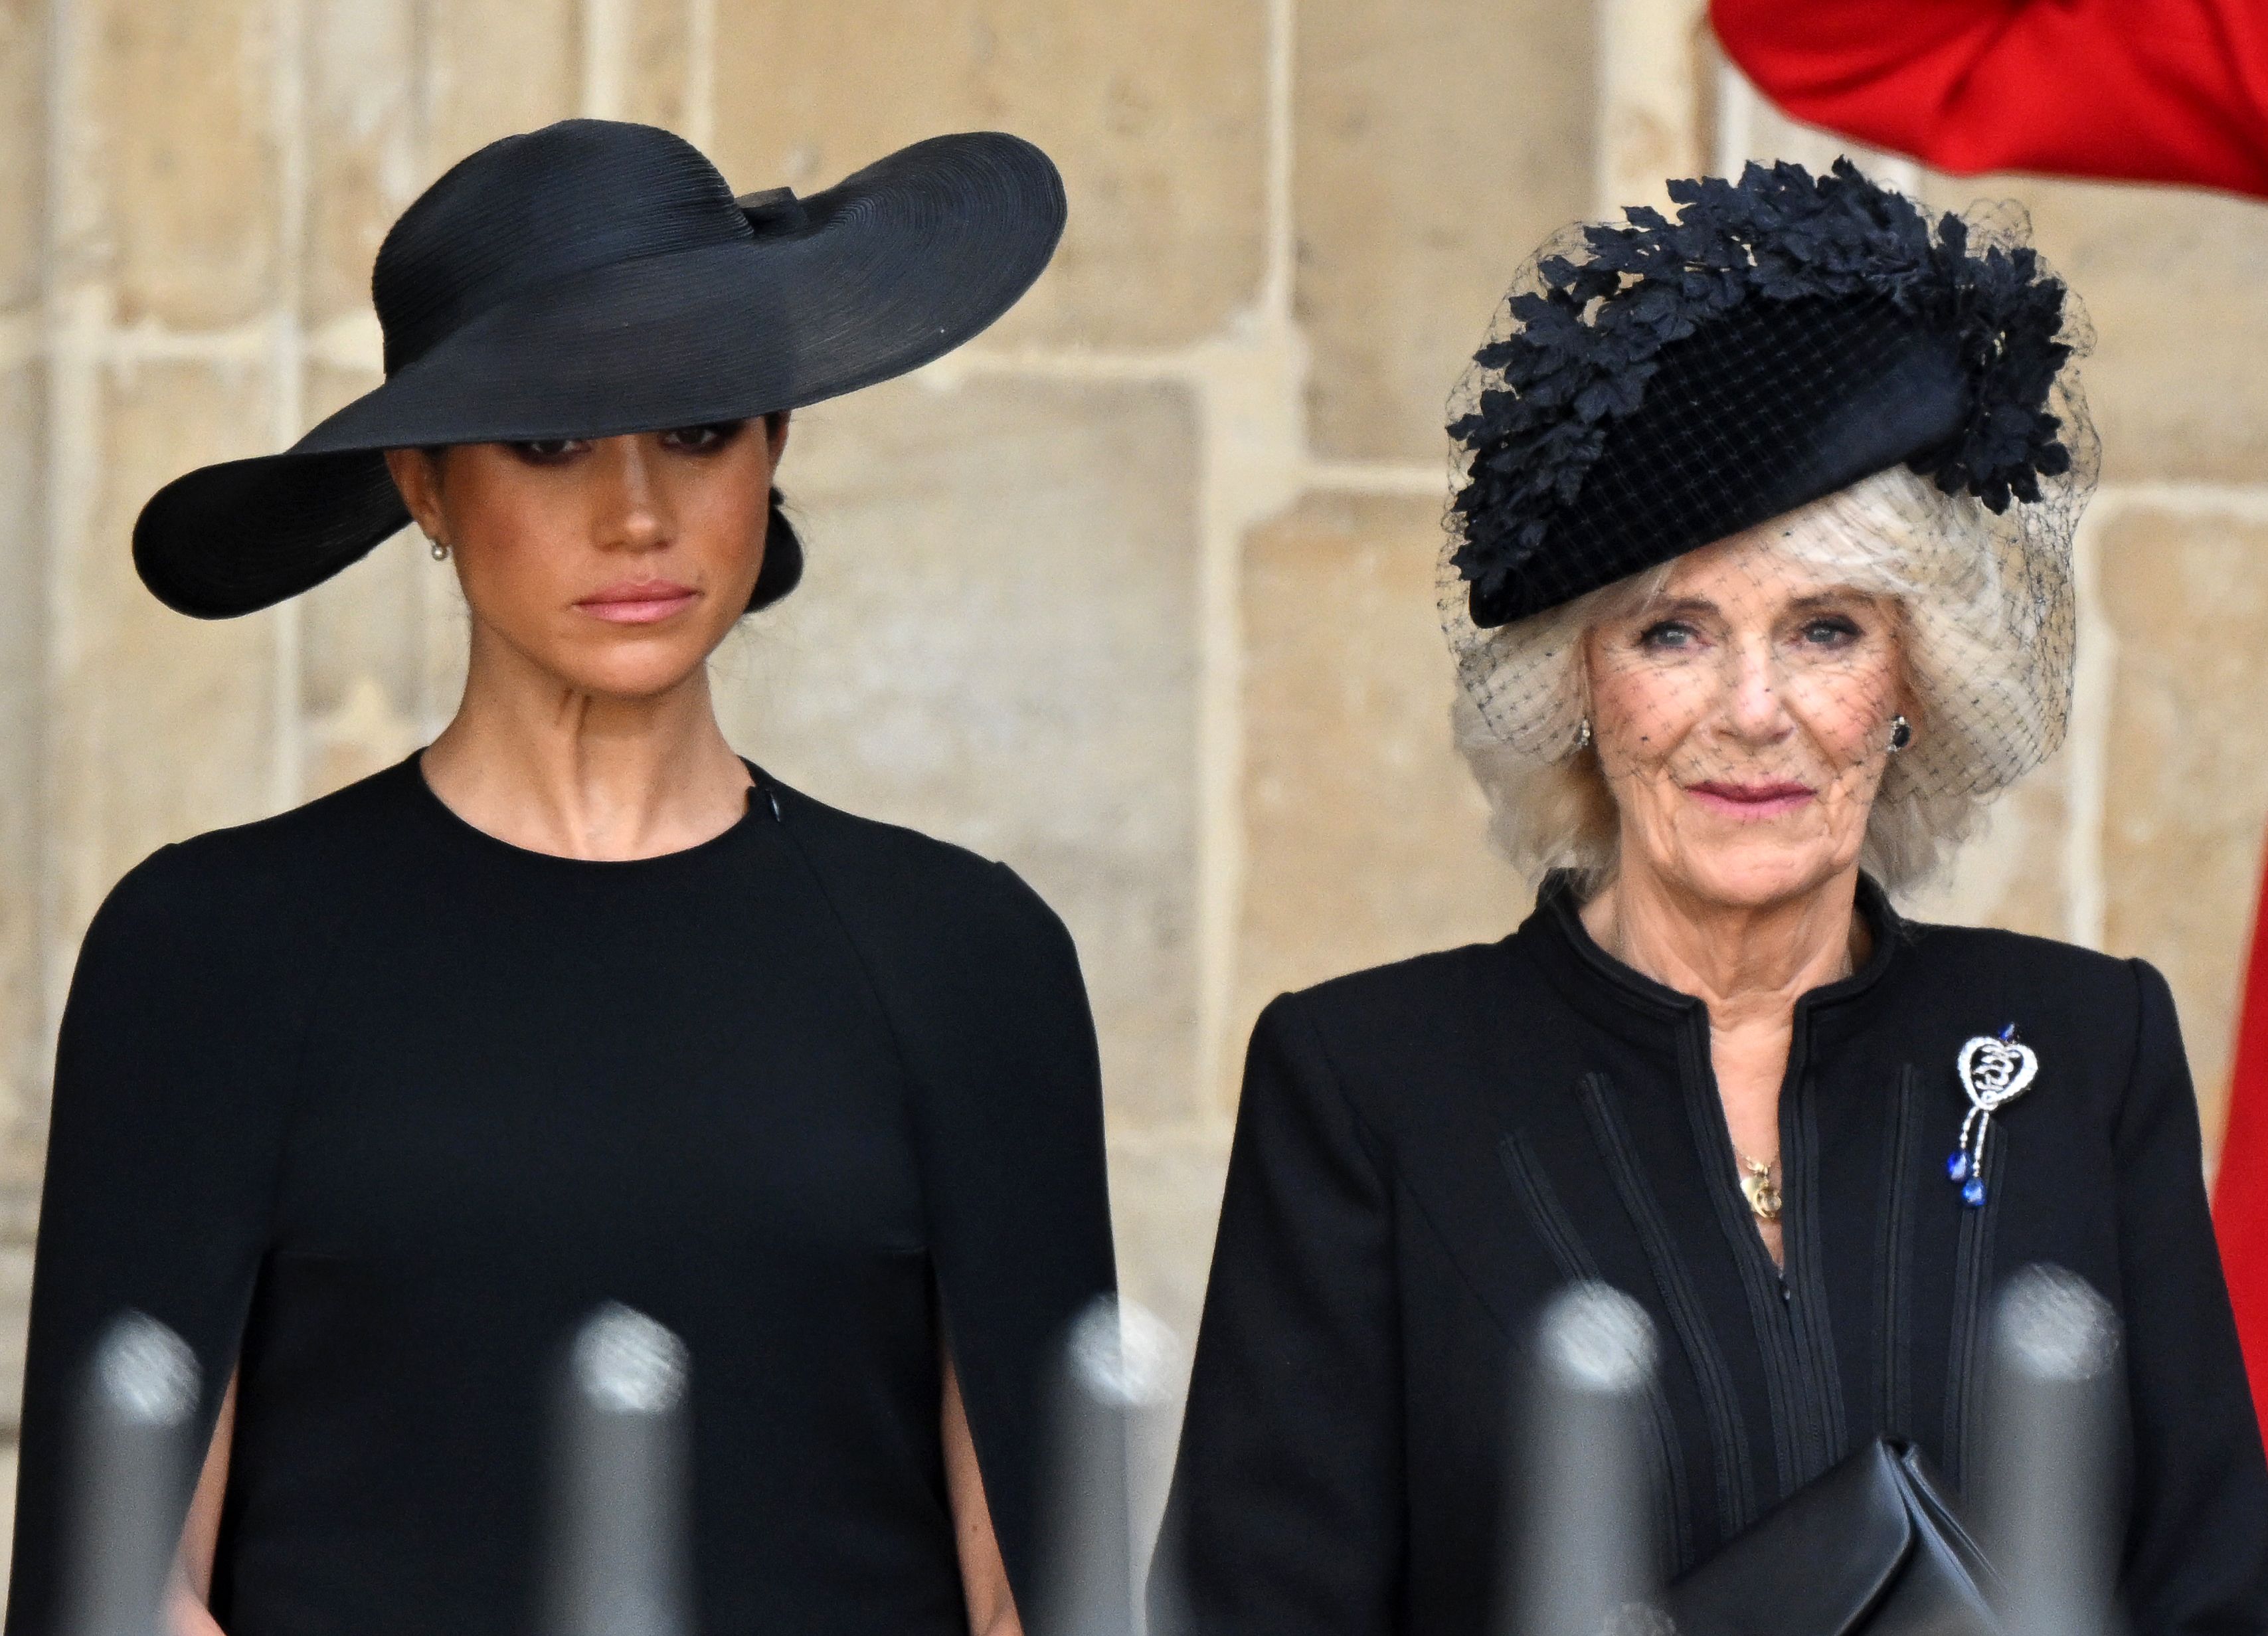 <p>Duchess Meghan and Camilla, Queen Consort watched as the coffin of Queen Elizabeth II left London's Westminster Abbey during <a href="https://www.wonderwall.com/celebrity/royals/best-photos-from-queen-elizabeth-ii-funeral-king-charles-princes-william-prince-harry-george-charlotte-kate-meghan652347.gallery">her state funeral</a> on Sept. 19, 2022.</p>